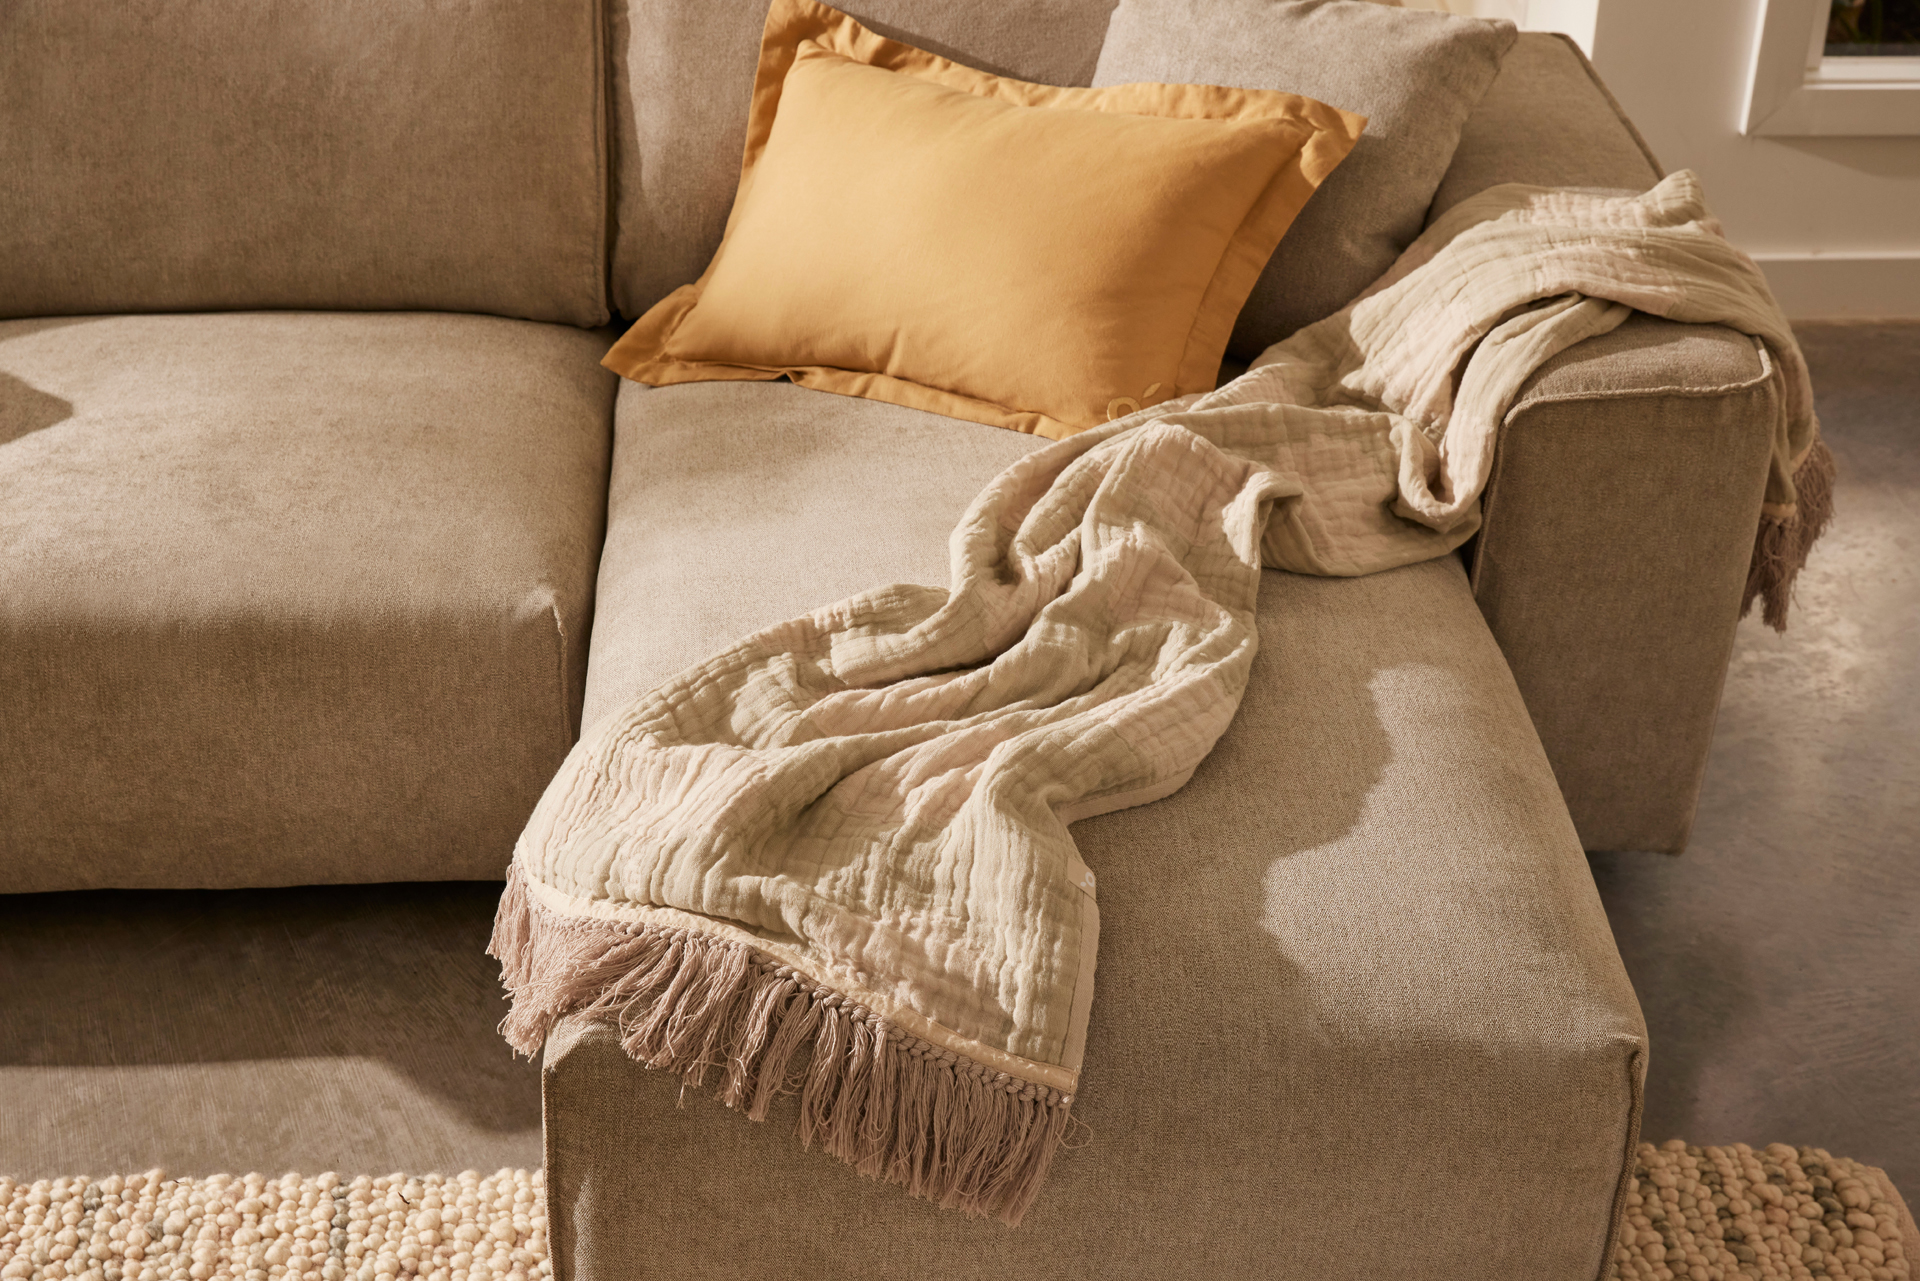 A textured throw casually draped on a couch with cushions